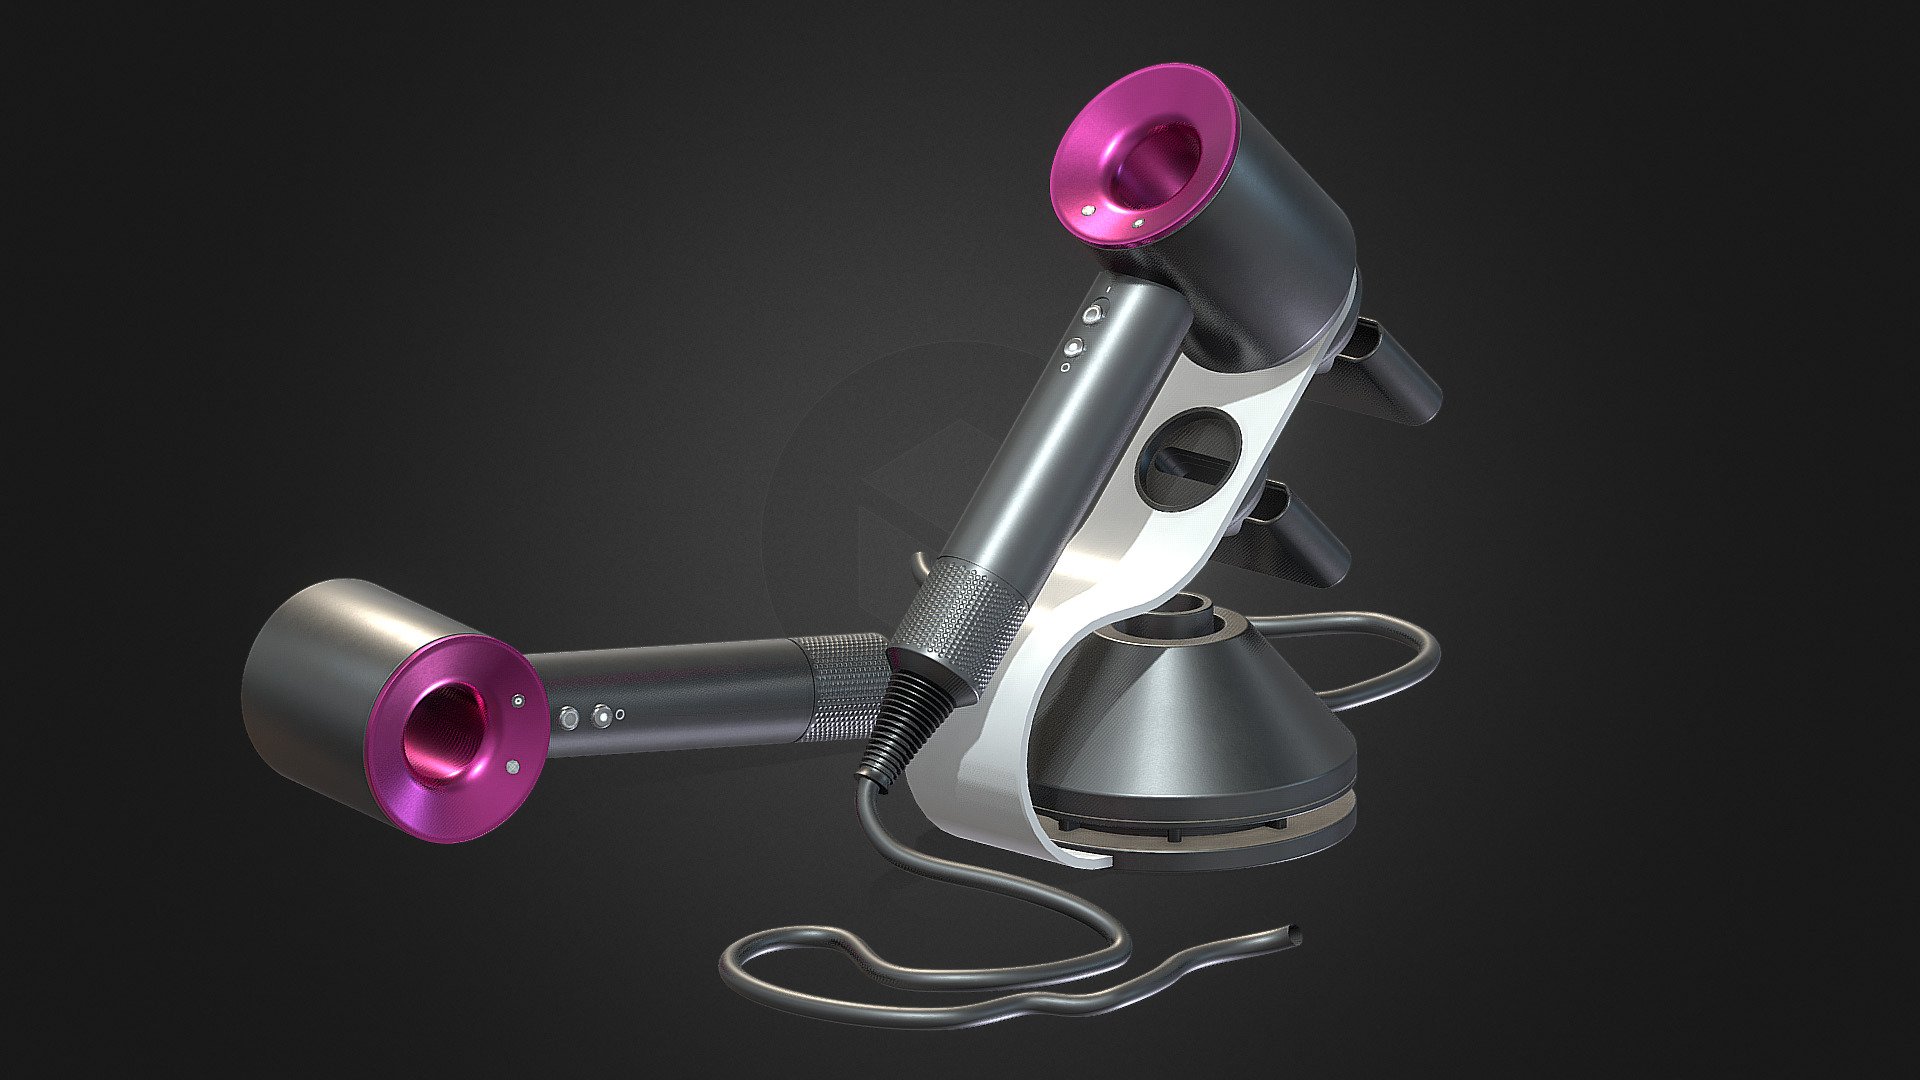 Dyson Supersonic hair dryer with stand for additional headders - model created in Blender, painted in Substance painter - Dyson Supersonic hair dryer - 3D model by skibigfx 3d model